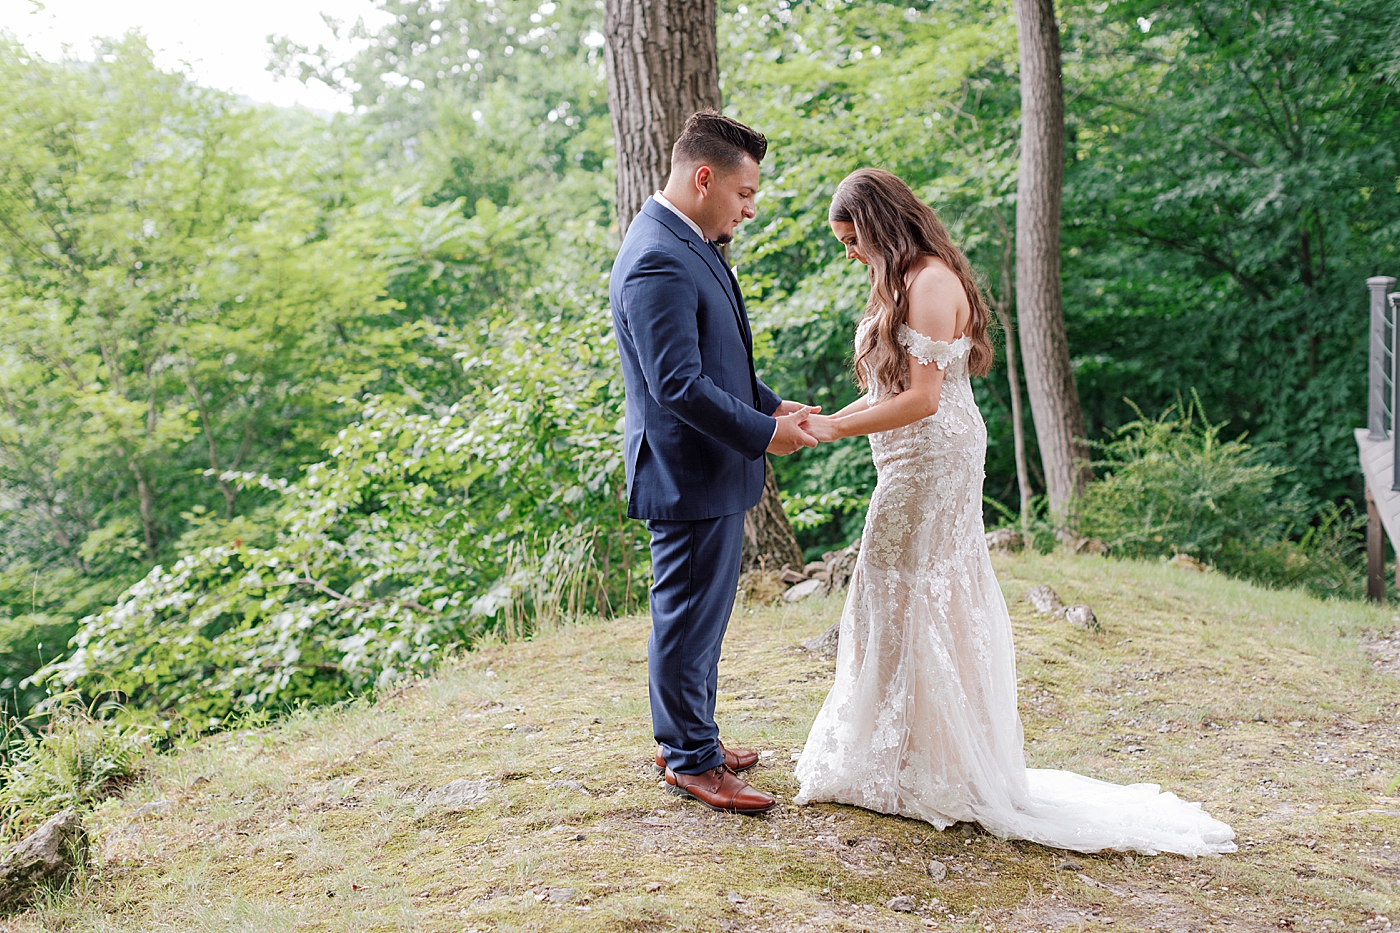 Bride and groom holding hands | Image by Hope Helmuth Photography 